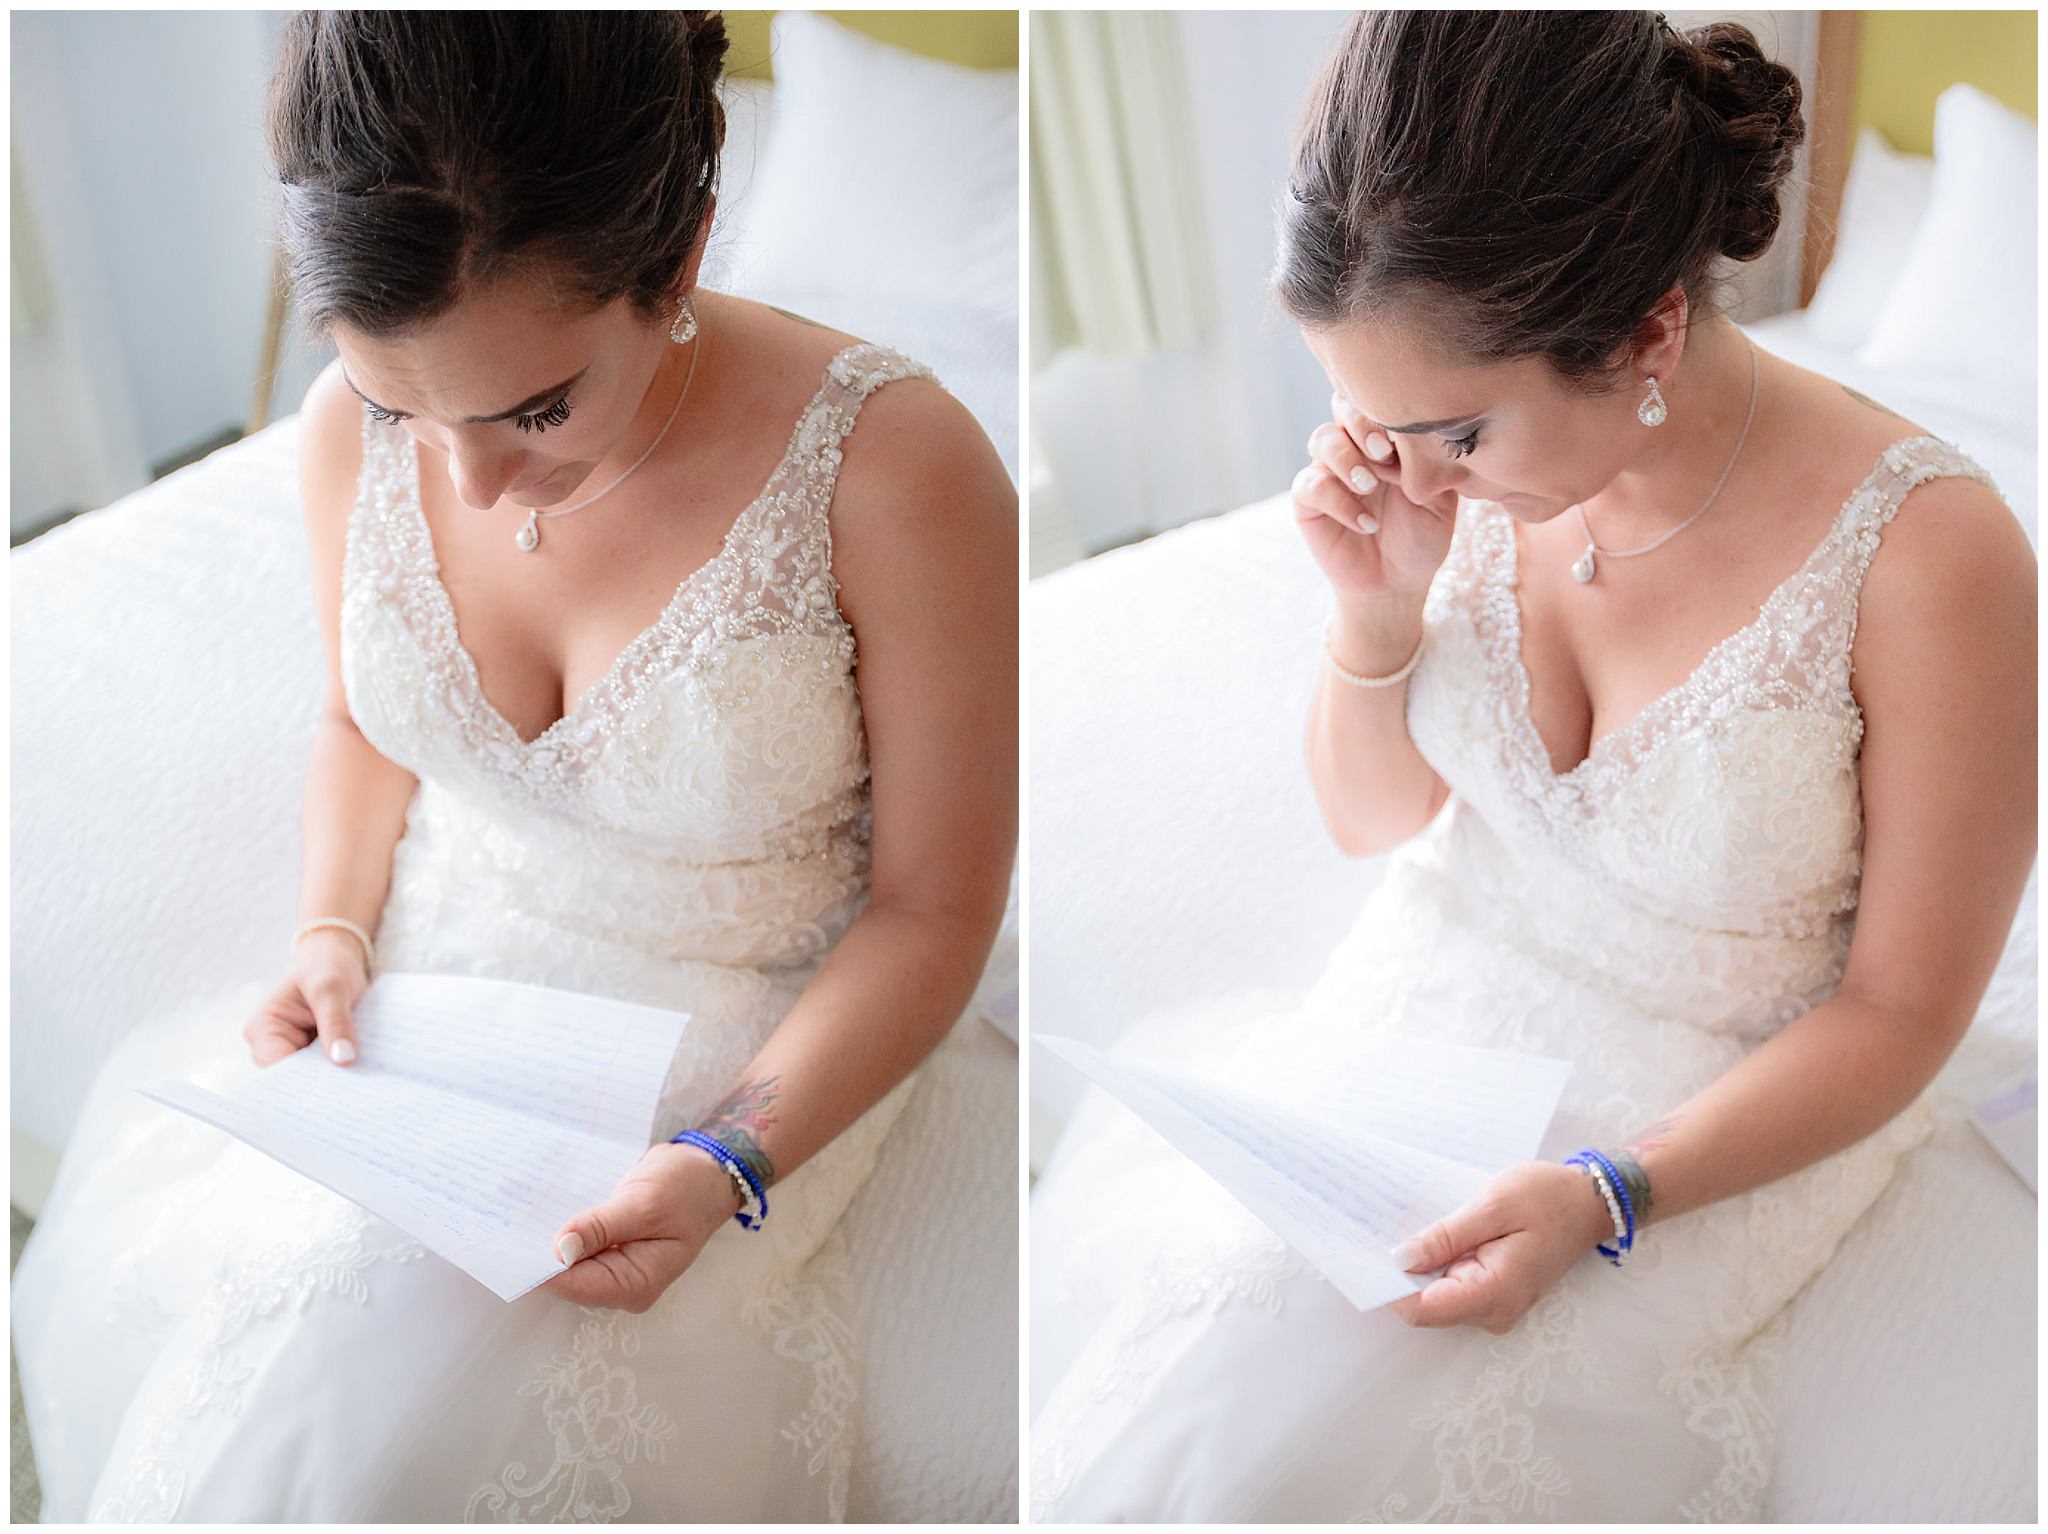 Bride reads a letter from her groom as she wipes tears from her eyes